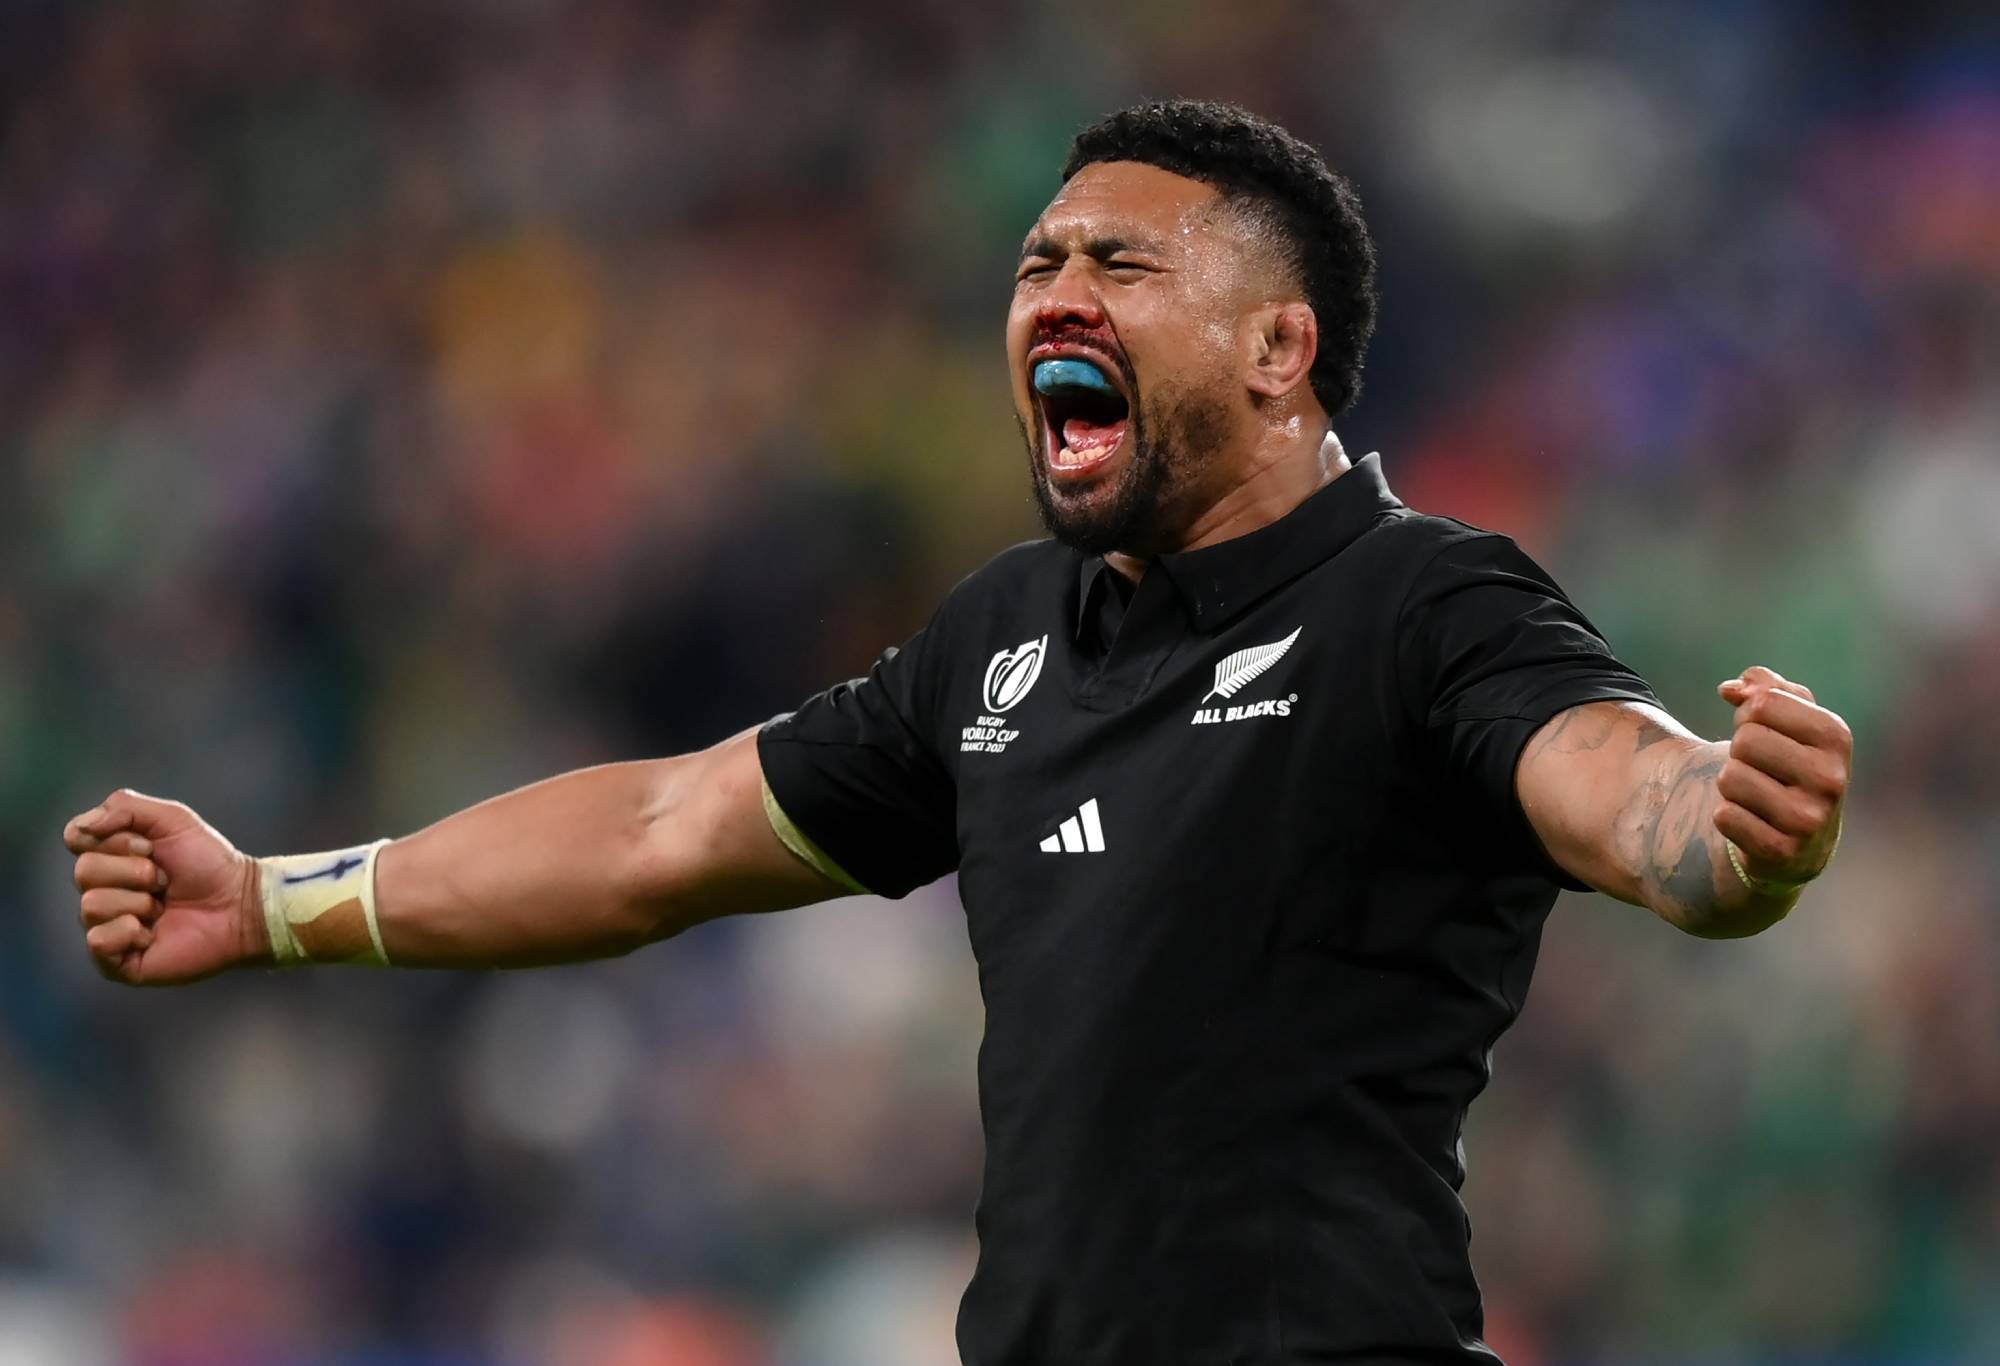 Ardie Savea of New Zealand celebrates victory at full-time following the Rugby World Cup France 2023 Quarter Final match between Ireland and New Zealand at Stade de France on October 14, 2023 in Paris, France. (Photo by Justin Setterfield - World Rugby/World Rugby via Getty Images)